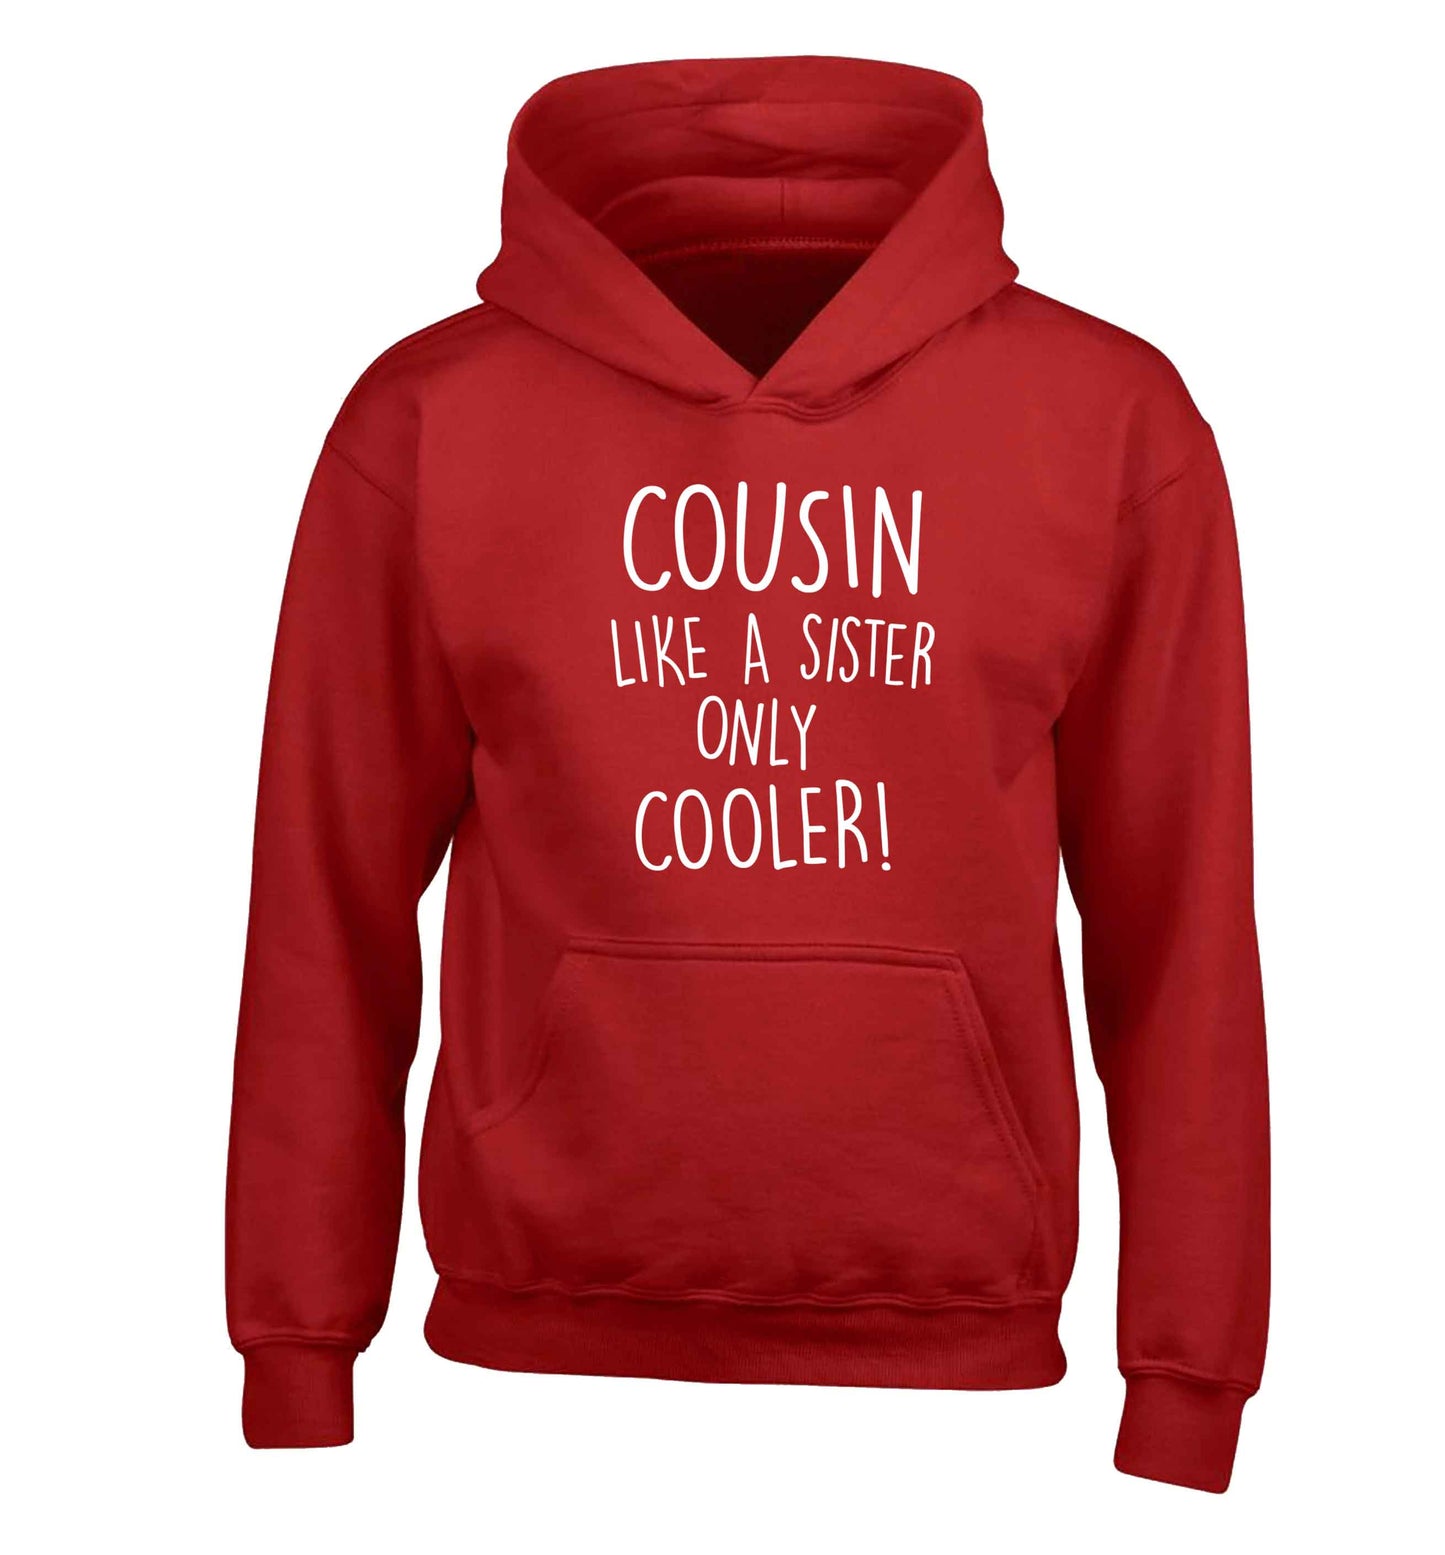 Cousin like a sister only cooler children's red hoodie 12-13 Years